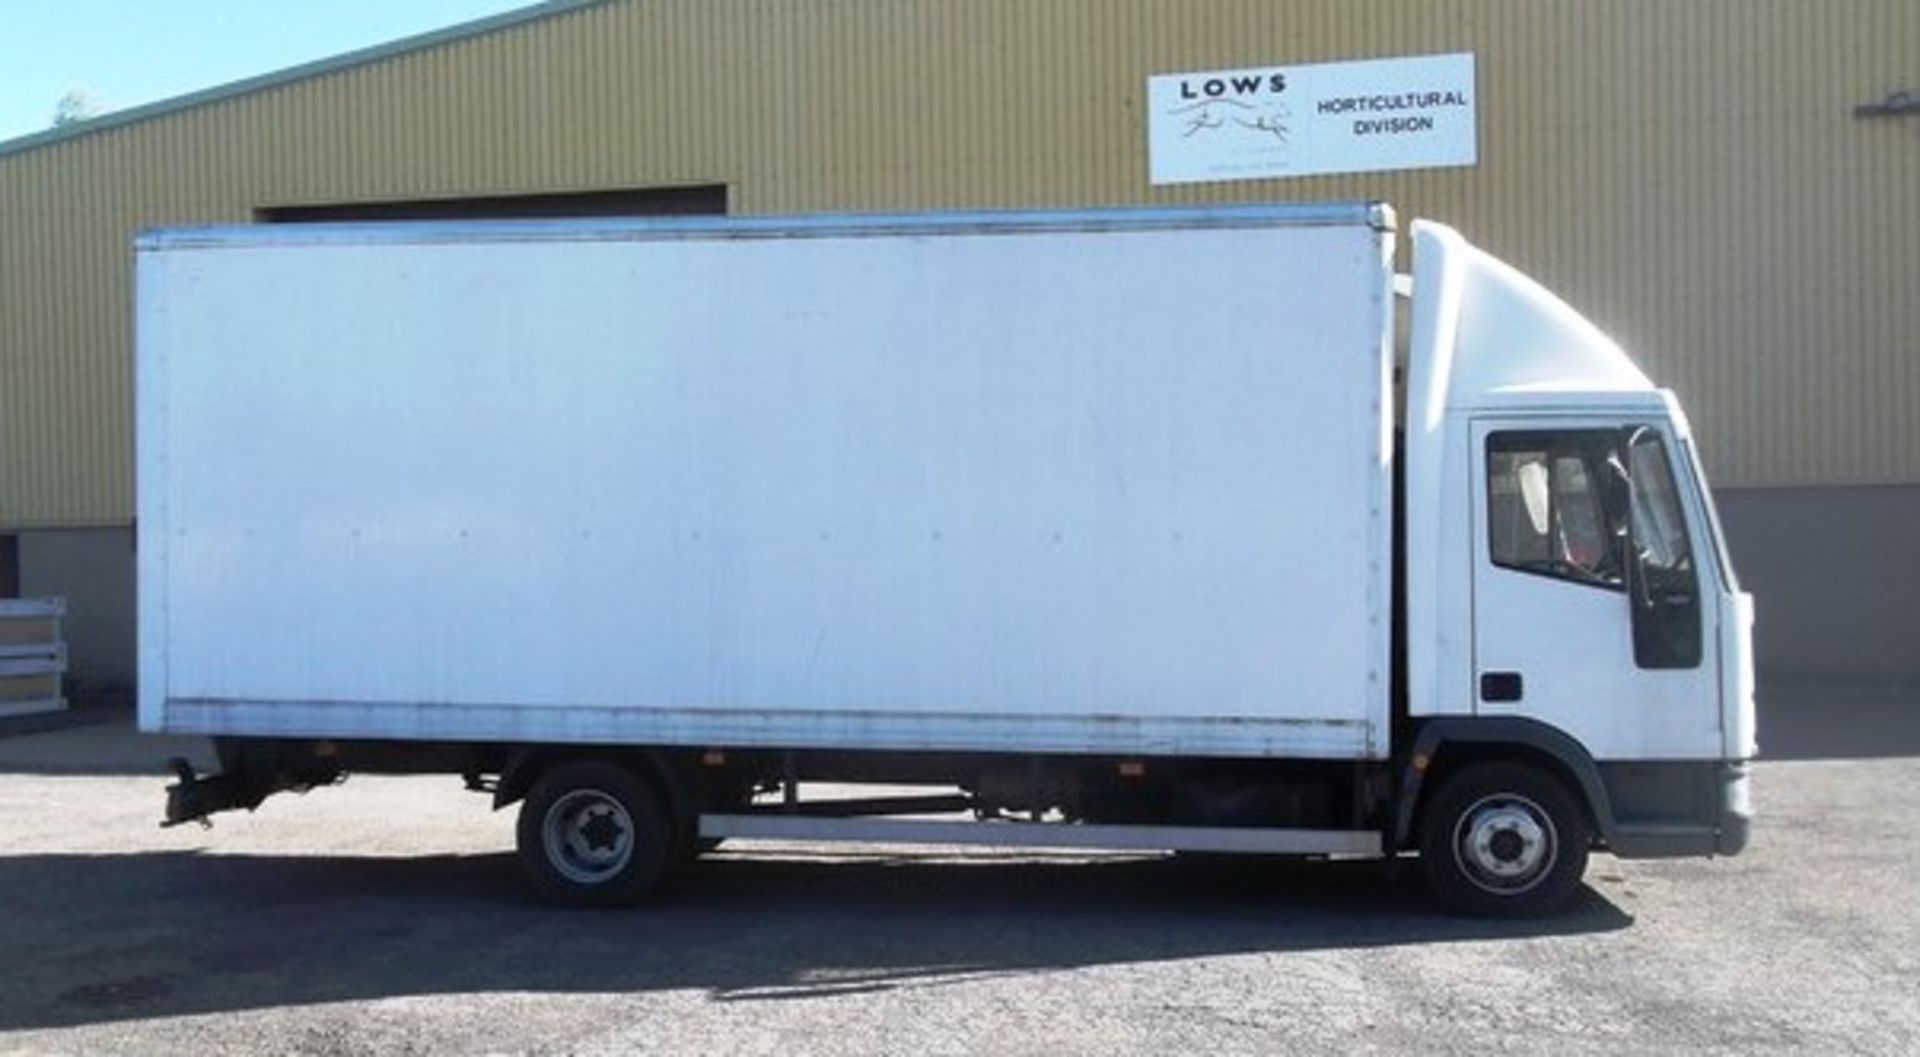 IVECO-FORD CARGO TECTOR - 3920cc
Body: 2 Dr Van
Color: White
First Reg: 05/03/2004
Doors: 2
MOT: - Image 5 of 10